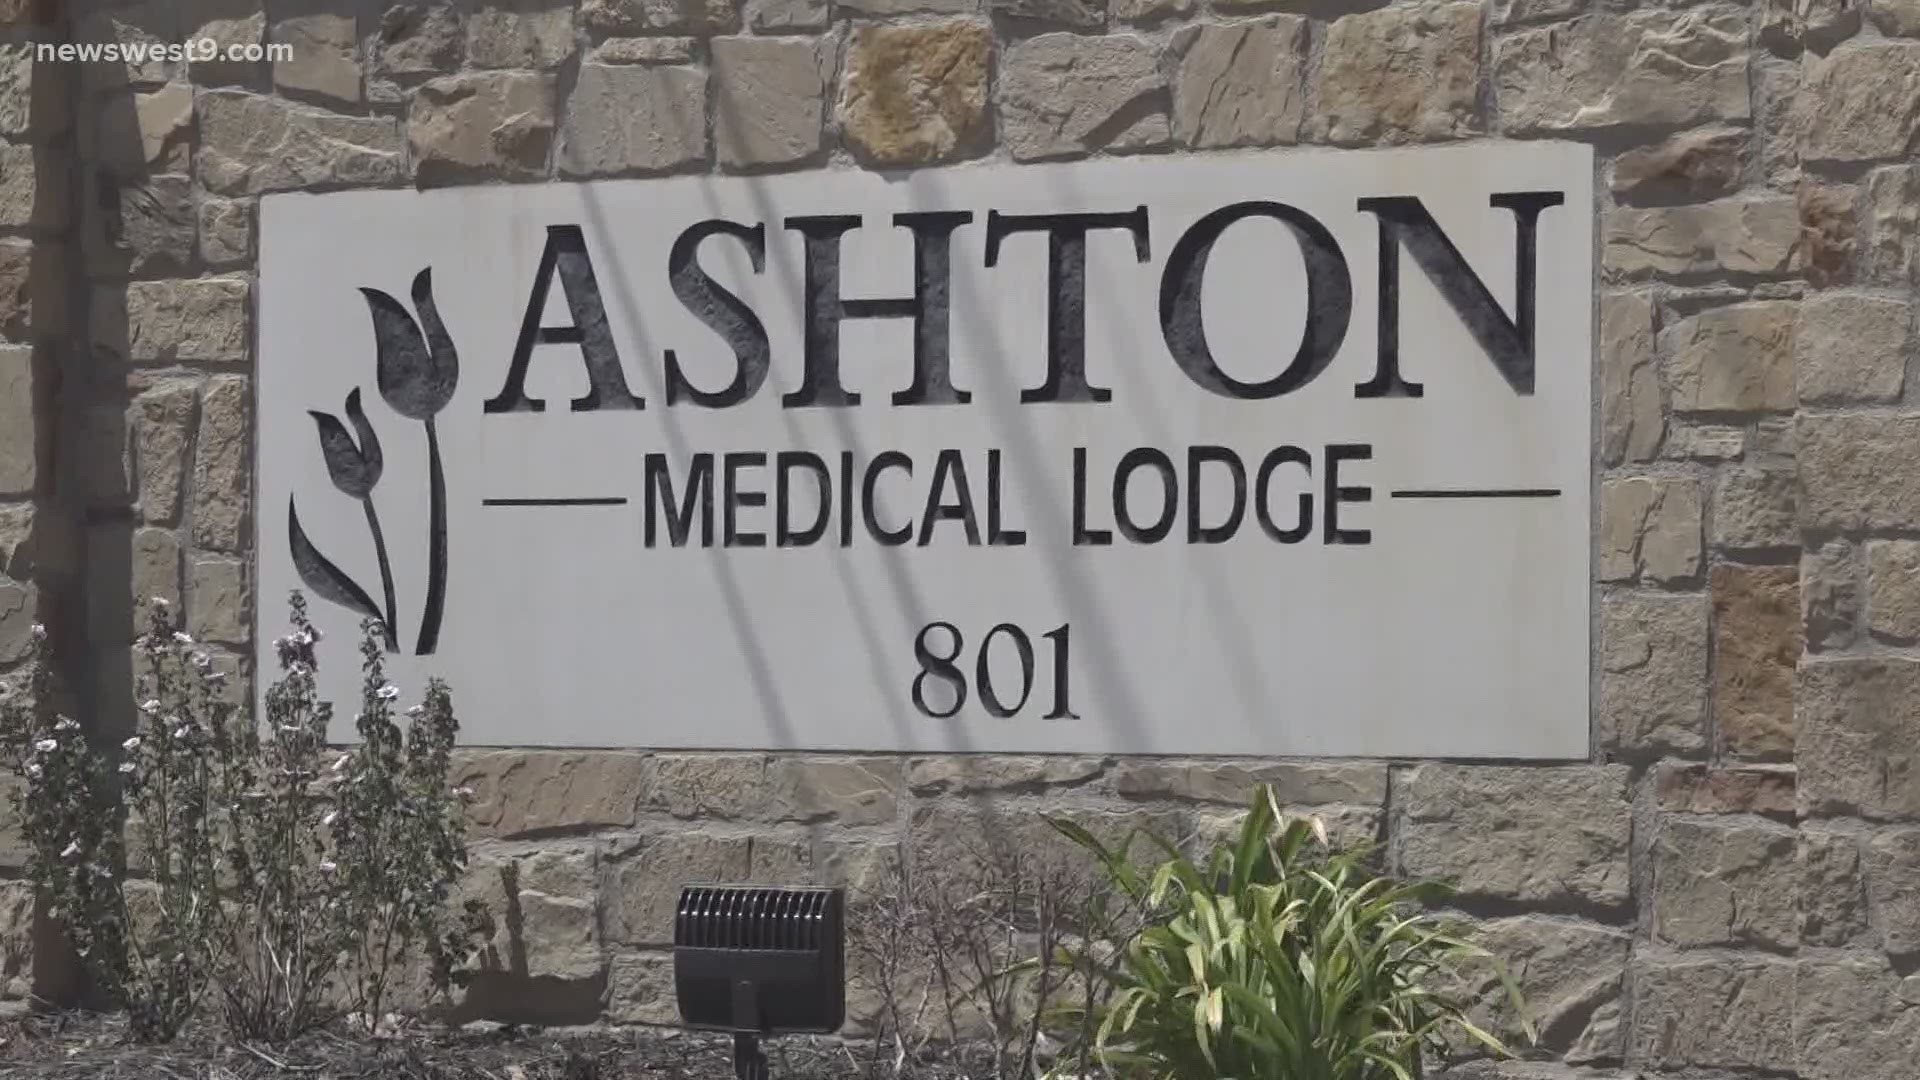 Family members say the Lodge was initially very forth-coming about the virus and the nursing home, but once cases started to spike they became tight lipped.